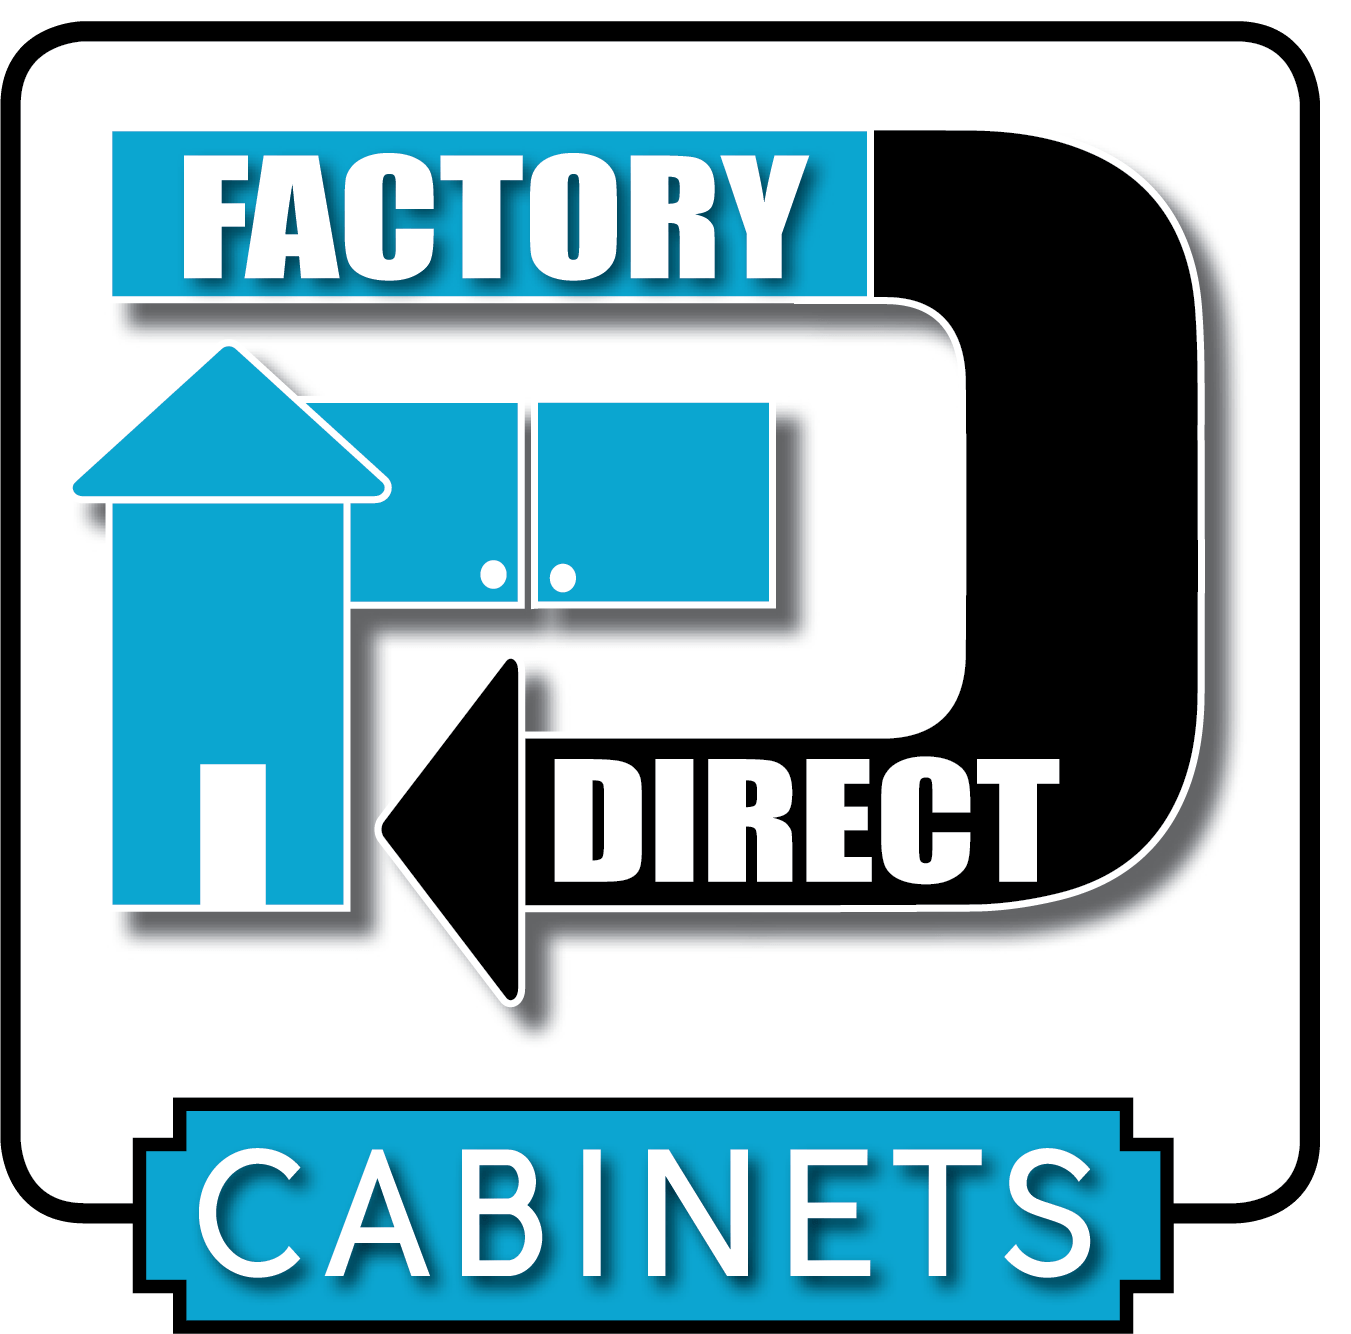 Factory Direct Cabinets